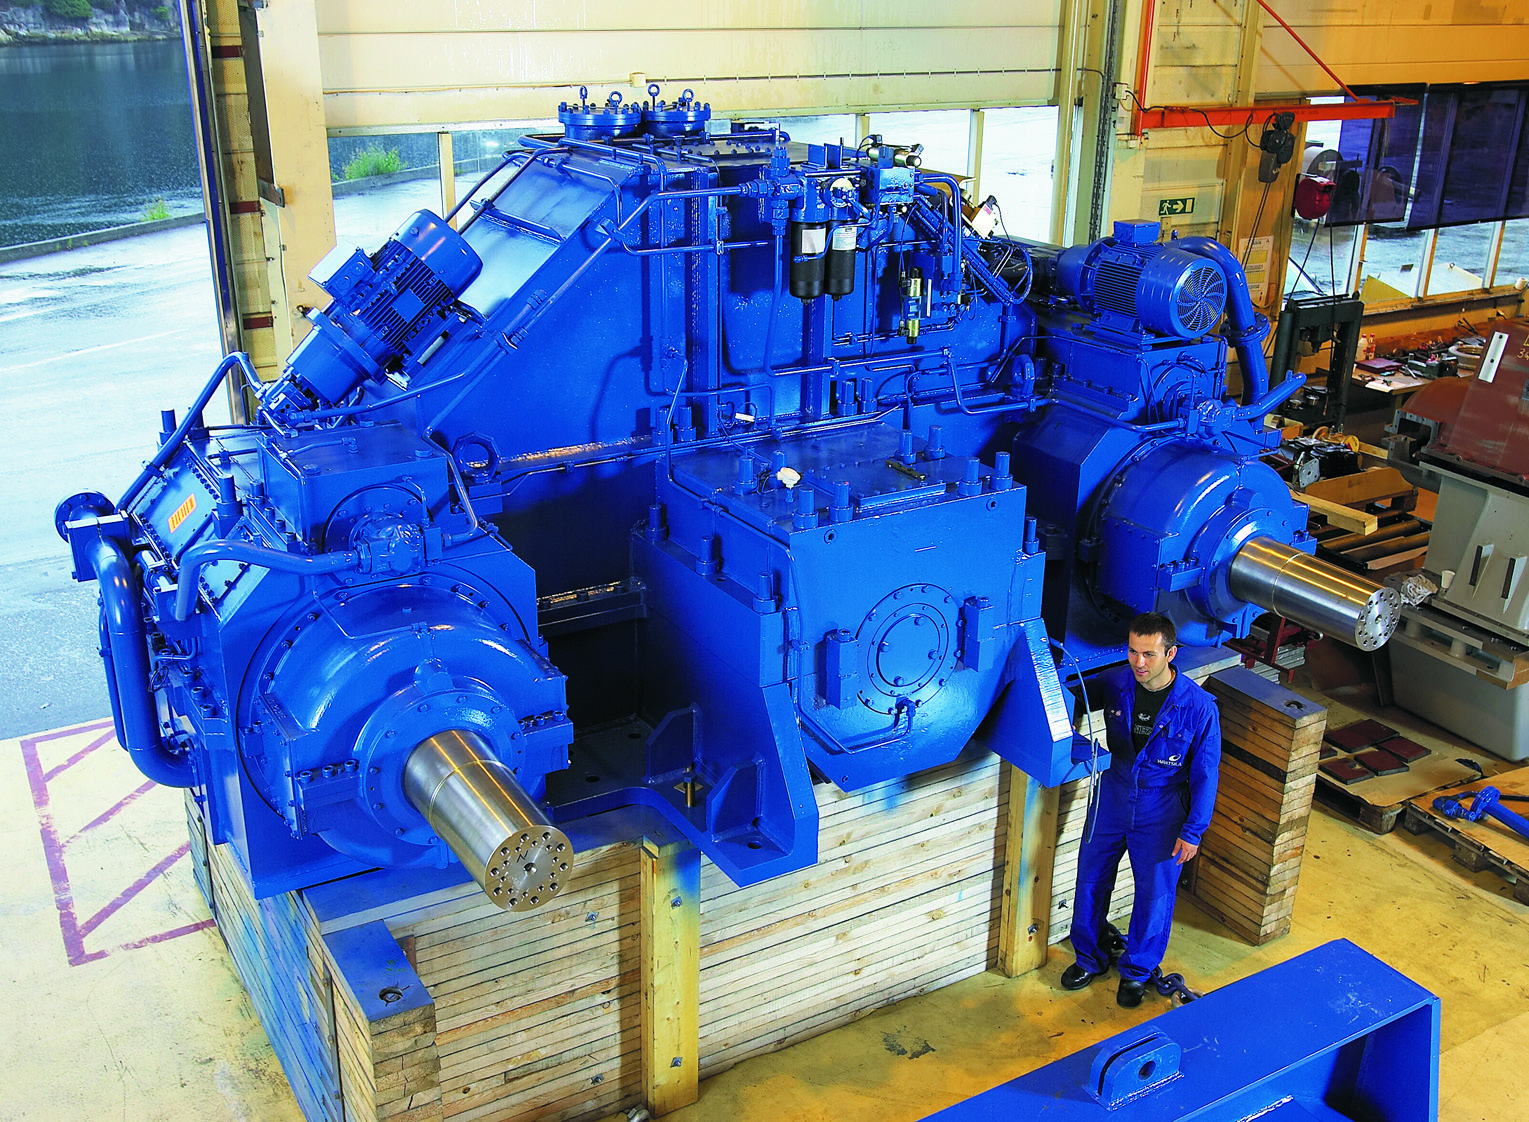 reduction gearbox